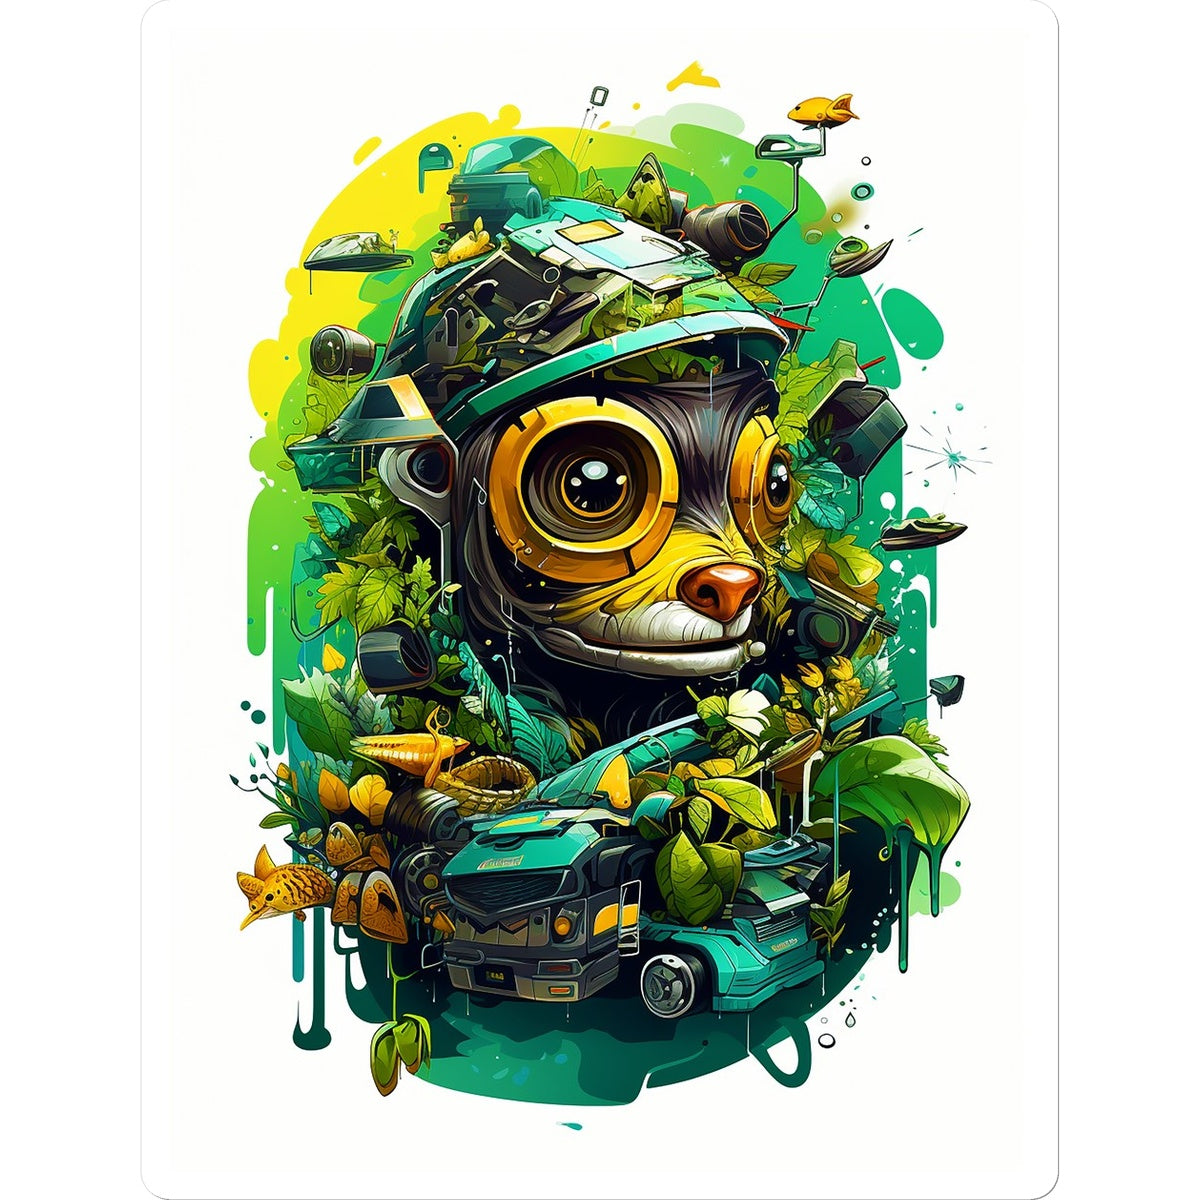 Nature's Resilience: Surreal Auto-Forest Artwork - Whimsical Raccoon and Greenery Infused Car  Sticker